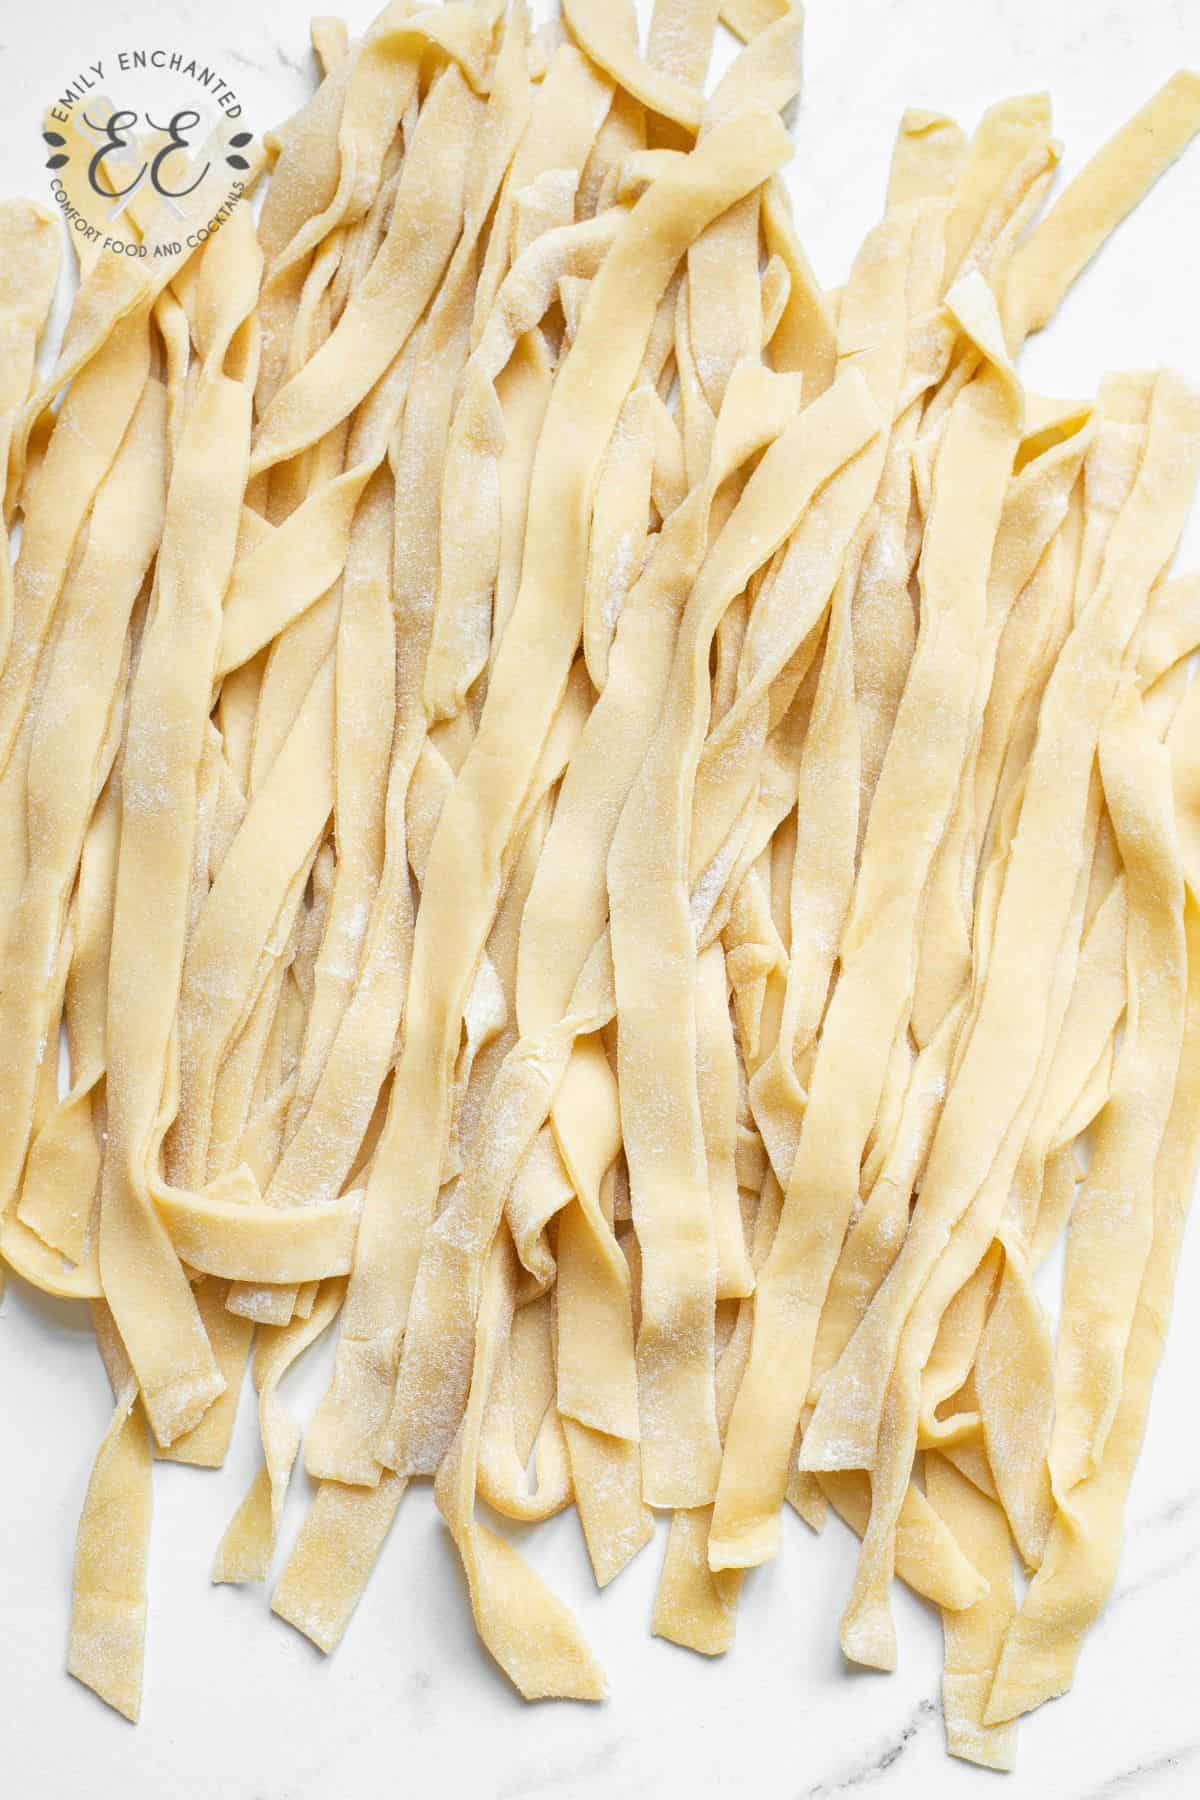 Pasta from Scratch Without Machine